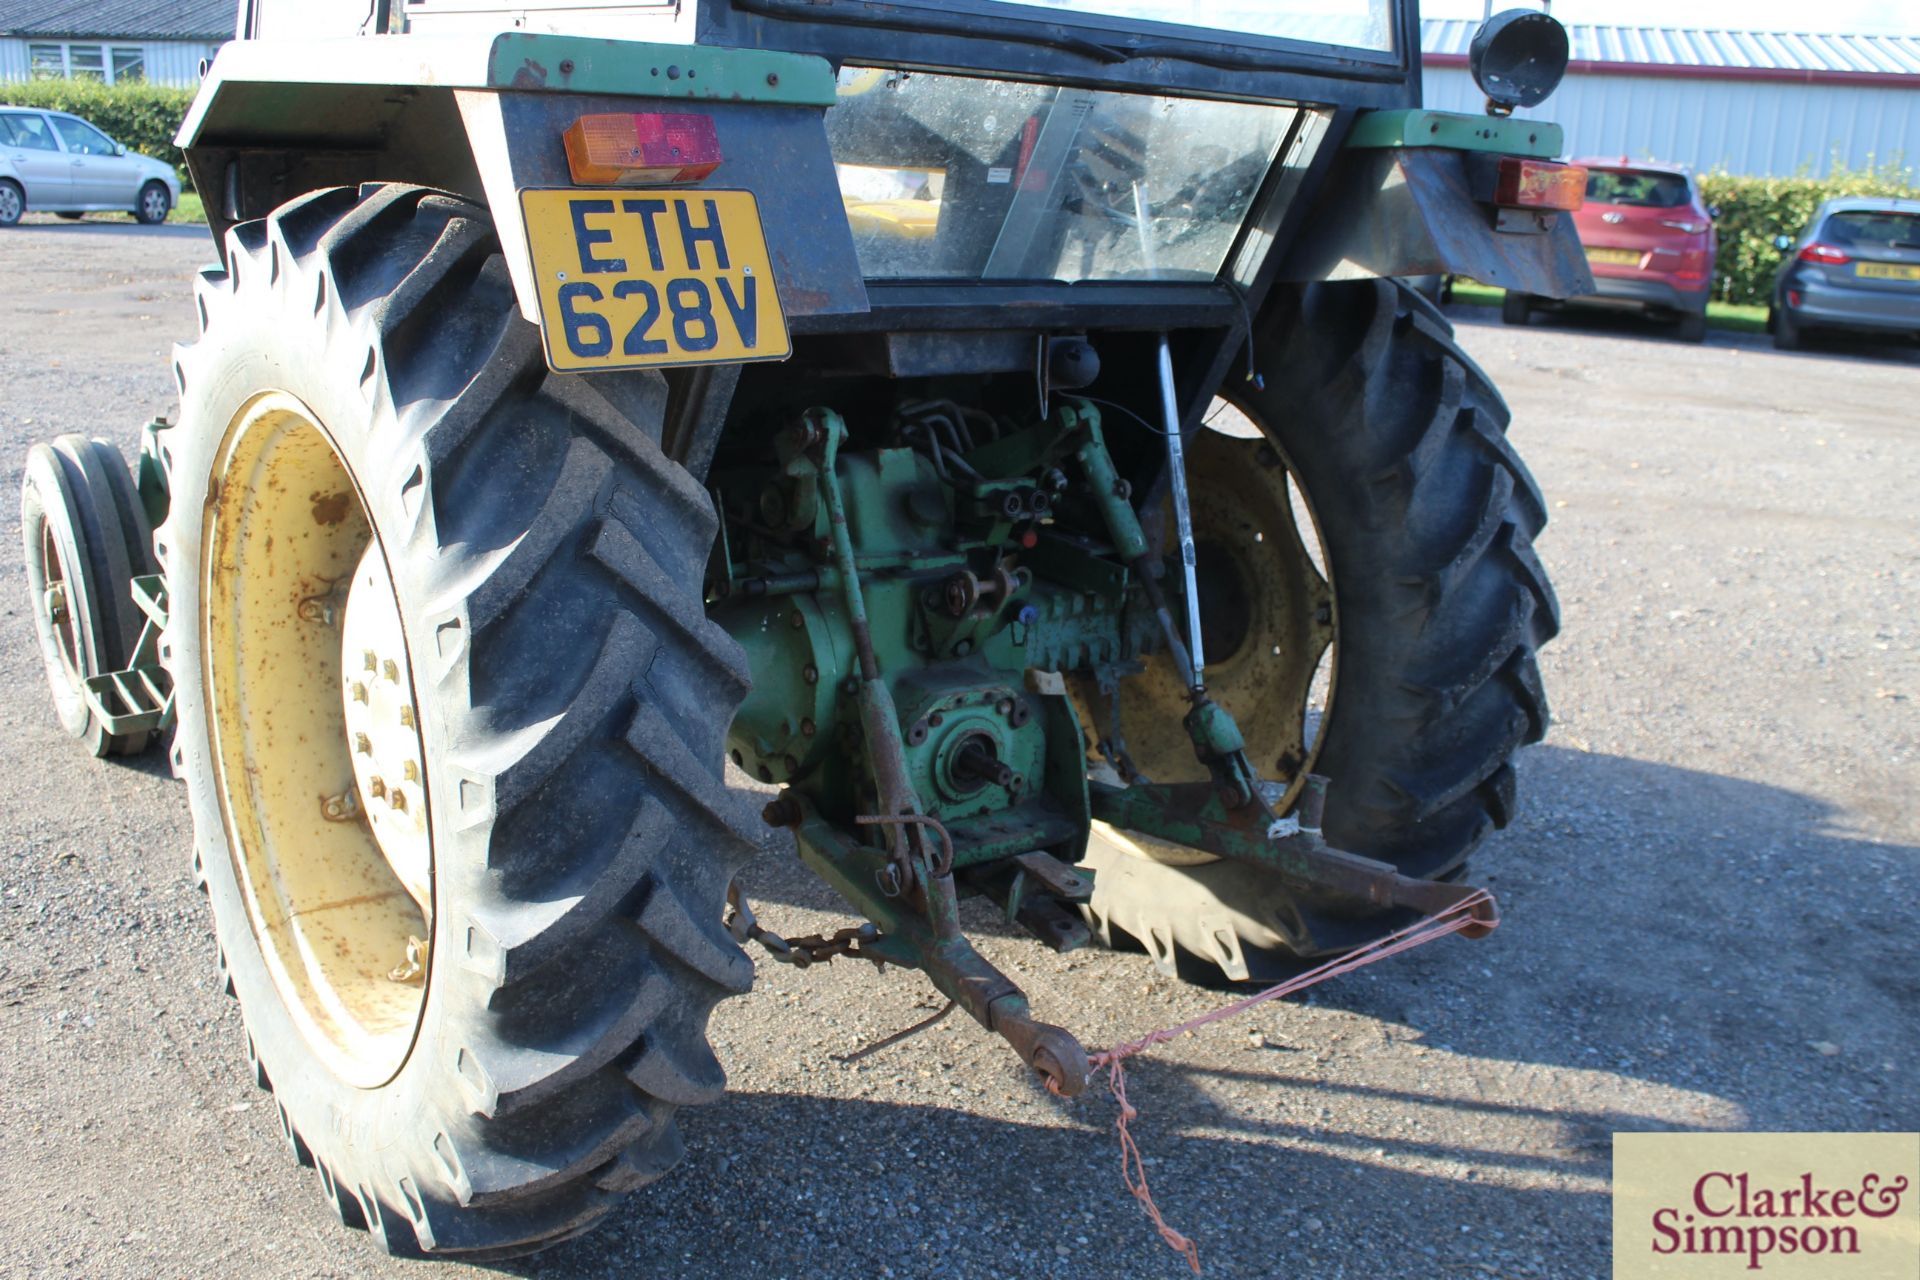 John Deere 1640 2WD tractor. Registration ETH 628V. 1980. 5,328 hours. 13.6R36 rear wheels and - Image 19 of 42